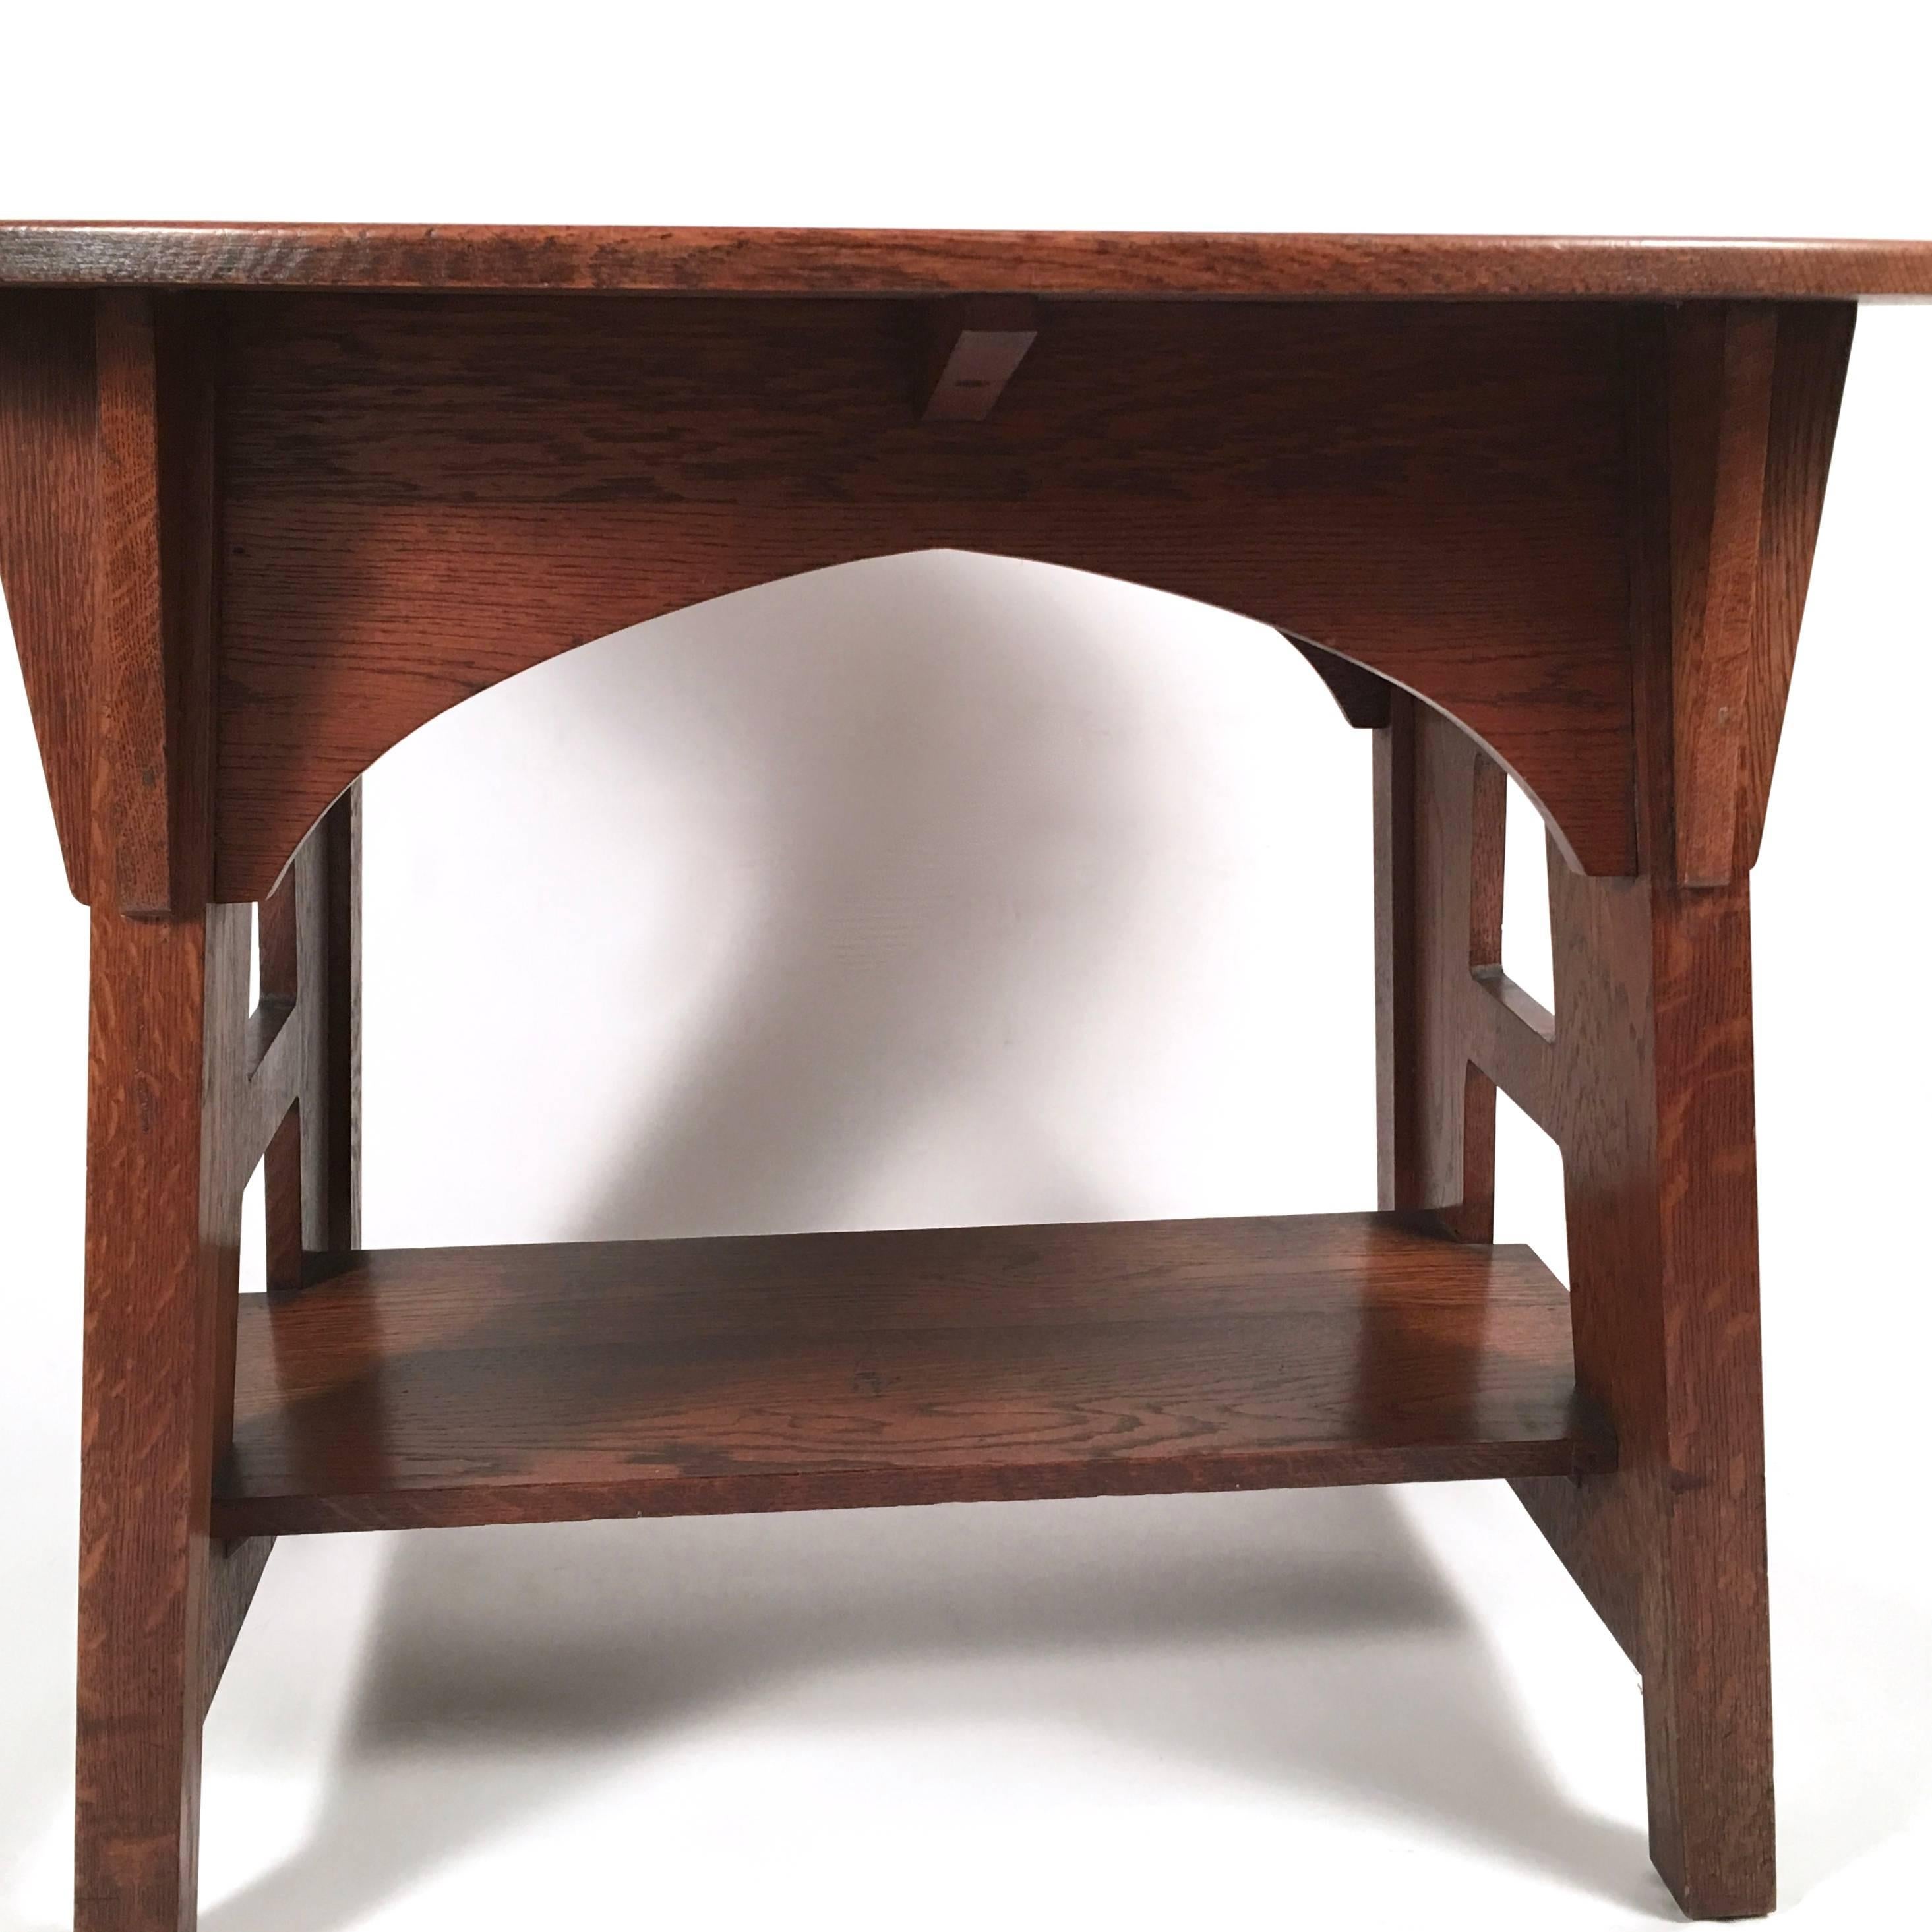 Carved Arts & Crafts Period Turtle-Back Table by Charles Limbert, circa 1915